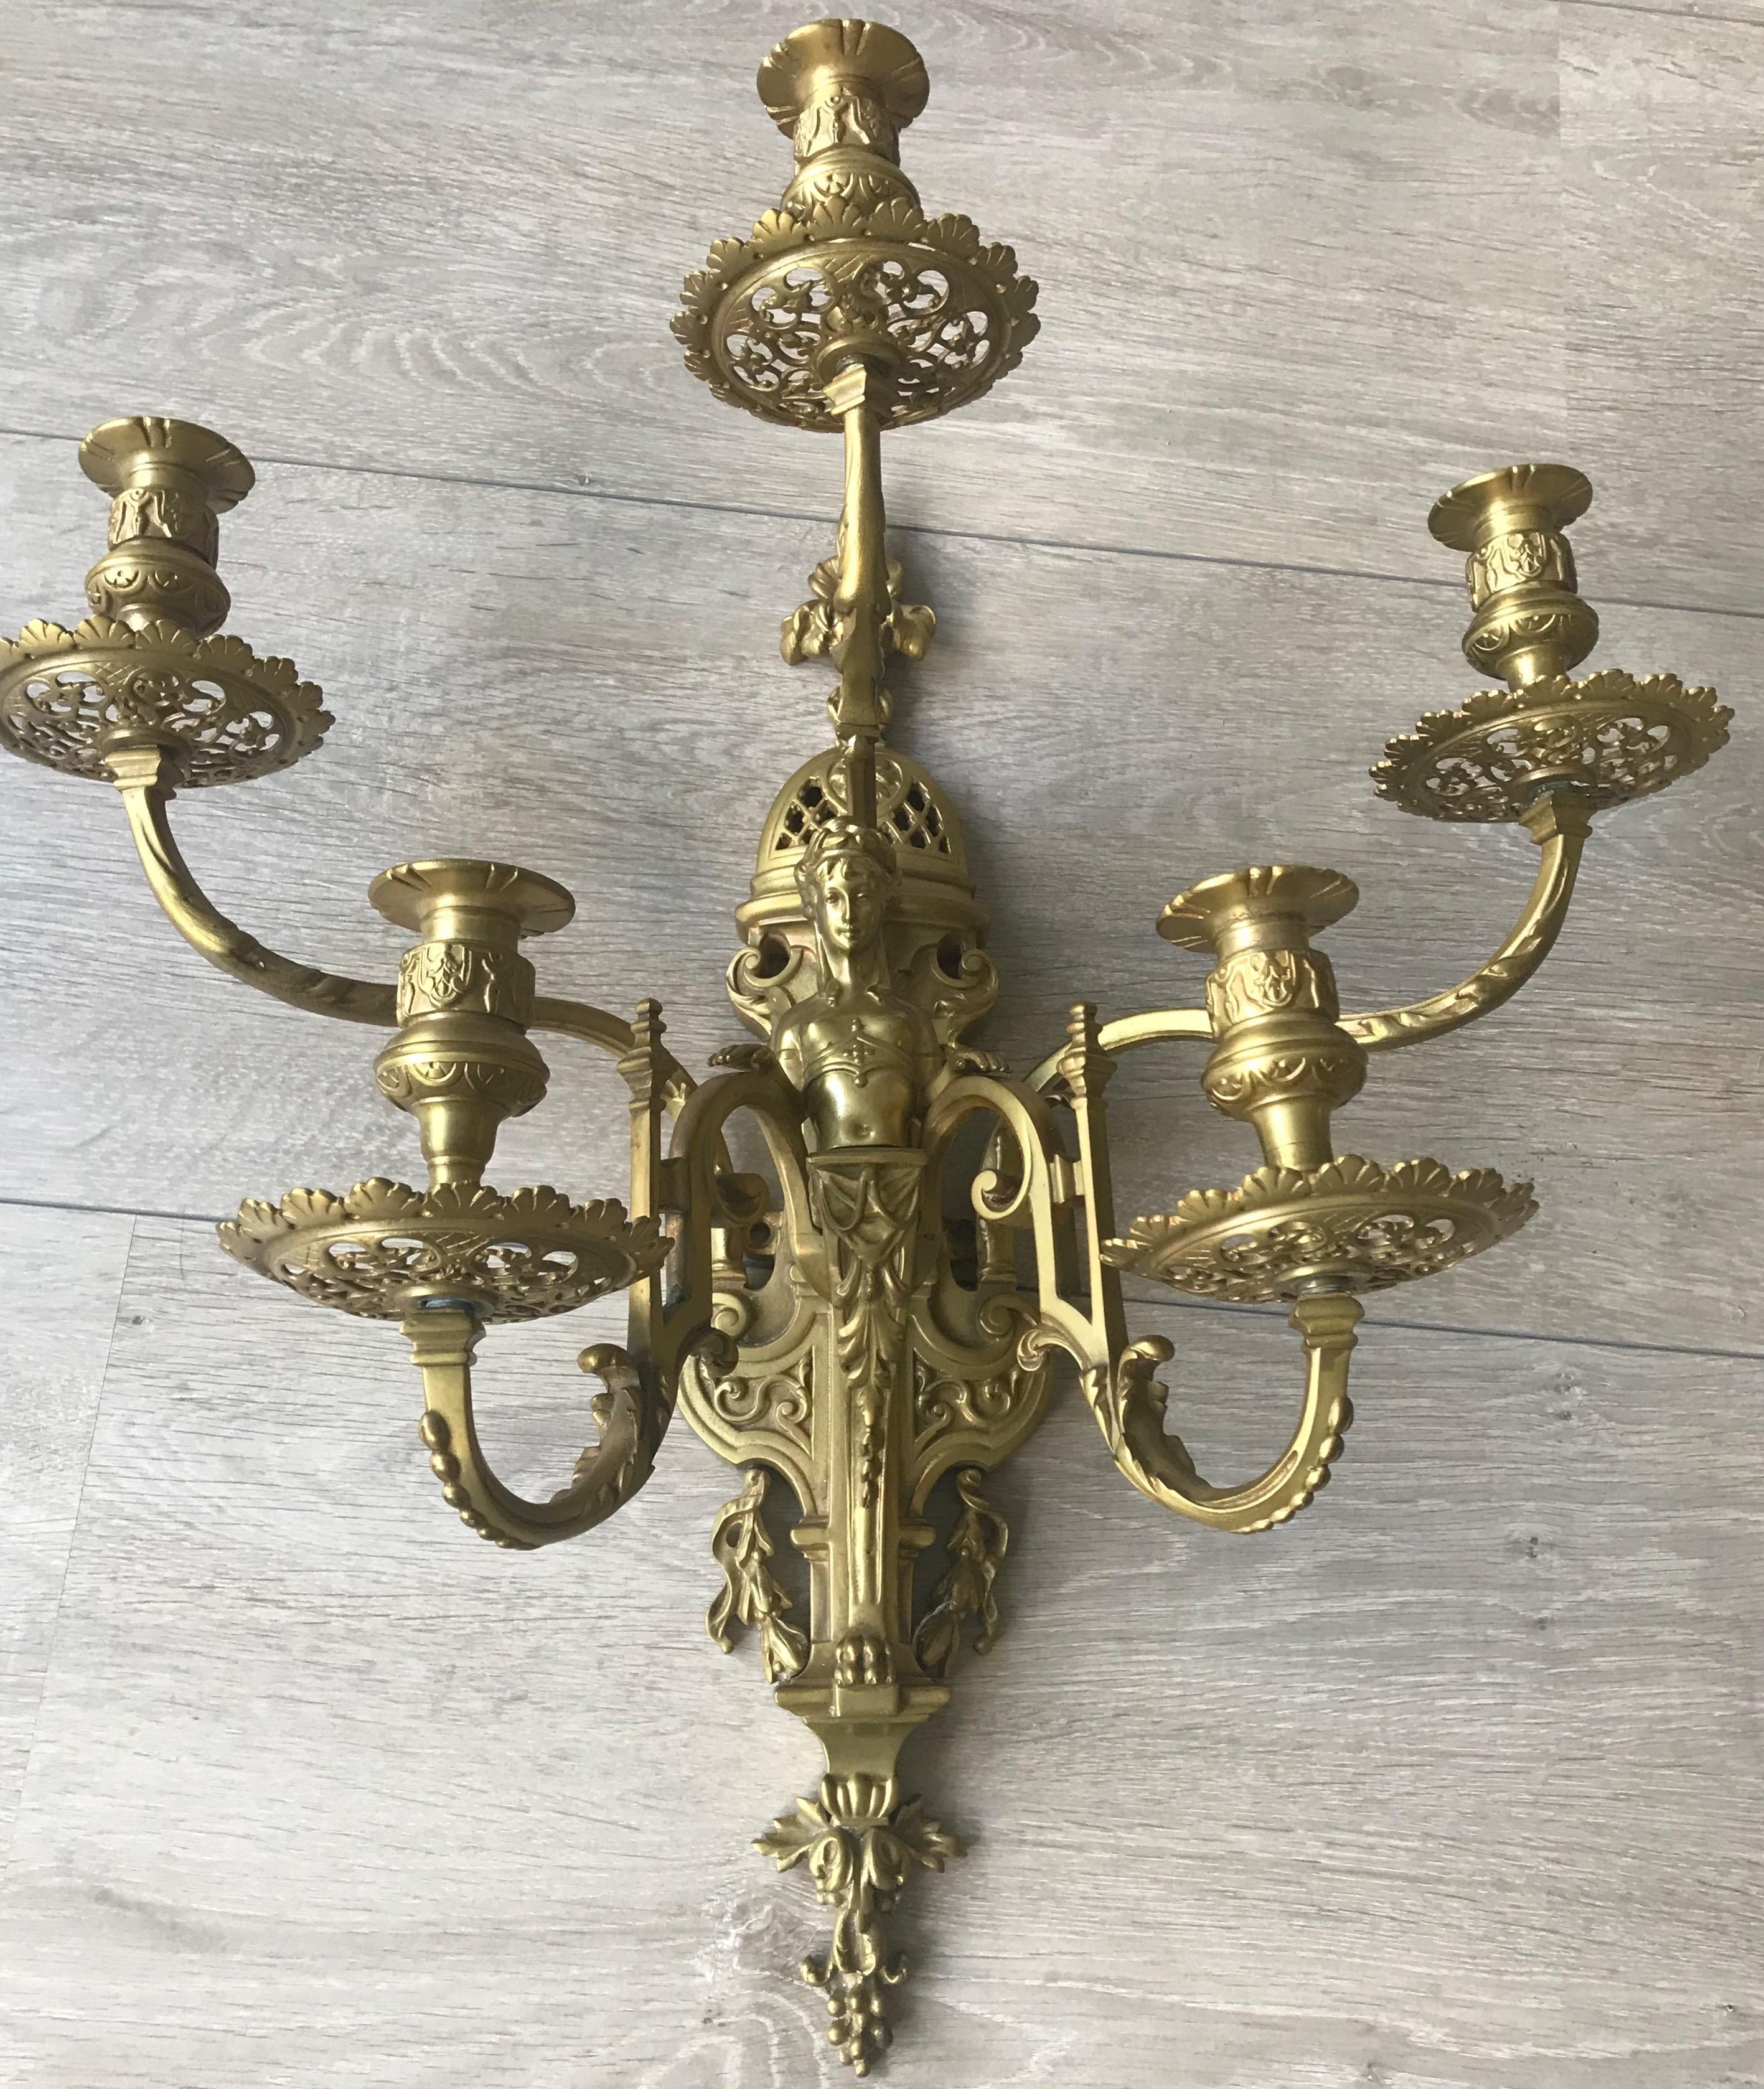 One of a kind, five-arm bronze wall fixture that can also be made electrical.

This large and all handcrafted sconce is a joy to own and look at, also if there are no candles in it. However, with the candles burning in the evenings, this late 1800s